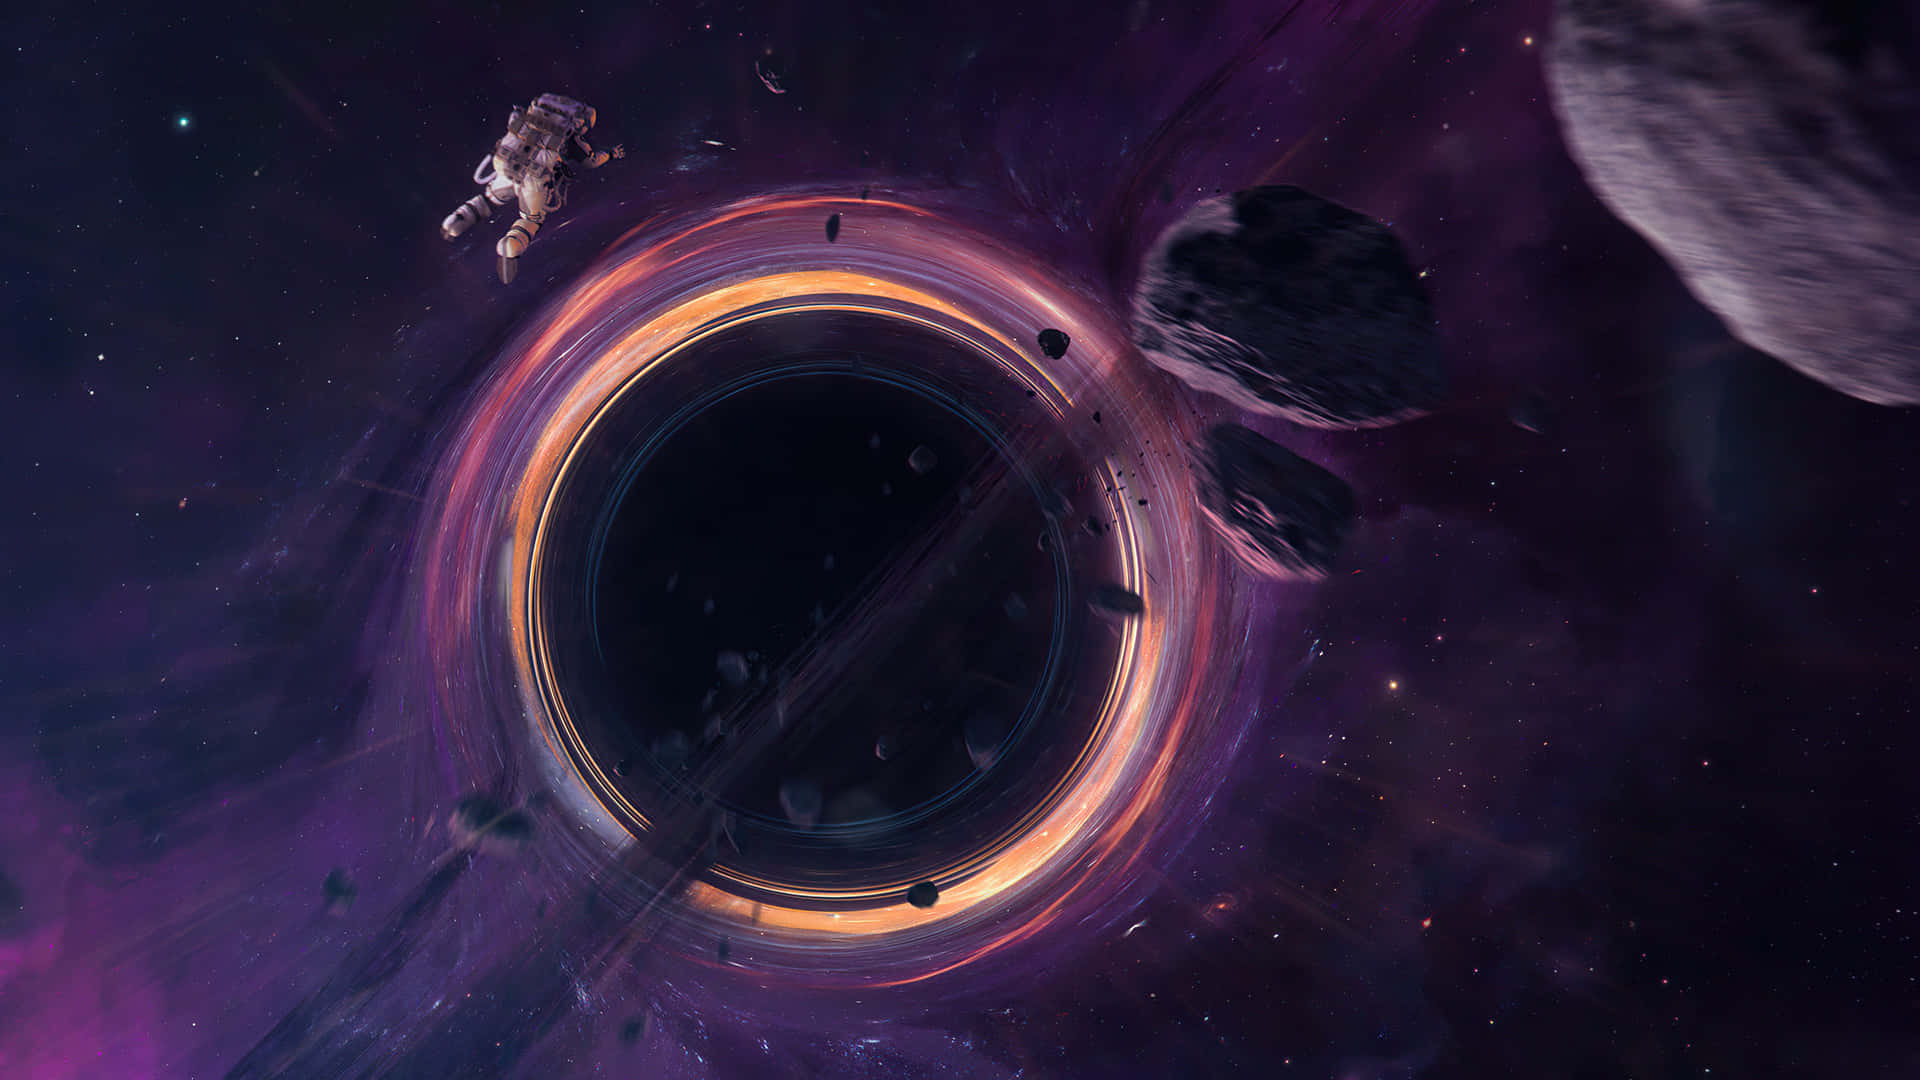 A Black Hole In Space With A Spaceship In The Background Wallpaper